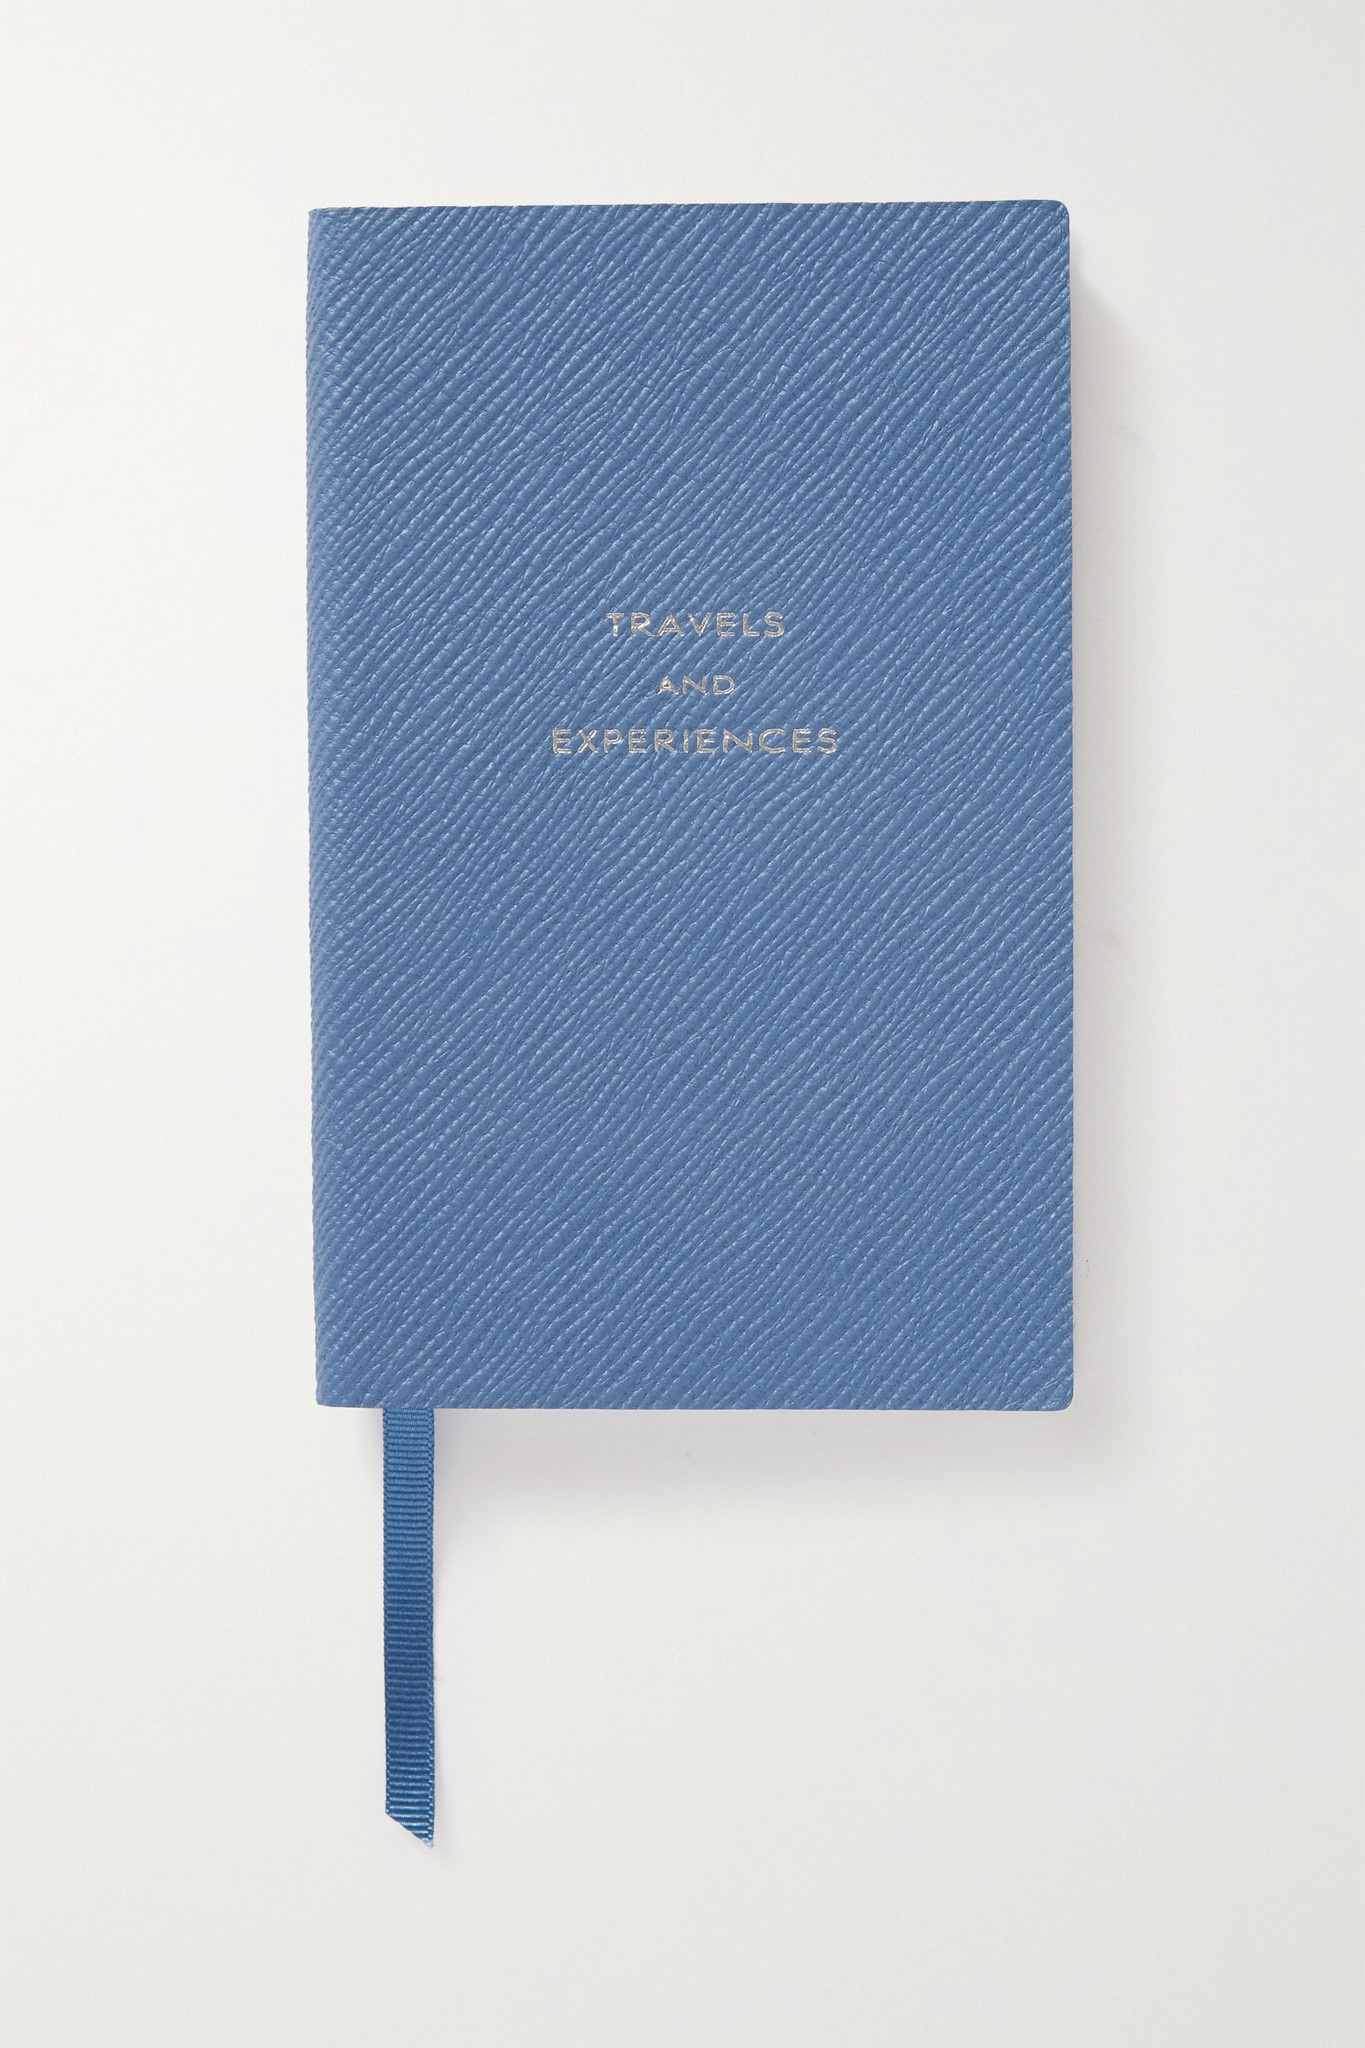 Panama Travels and Experiences textured-leather notebook - 1